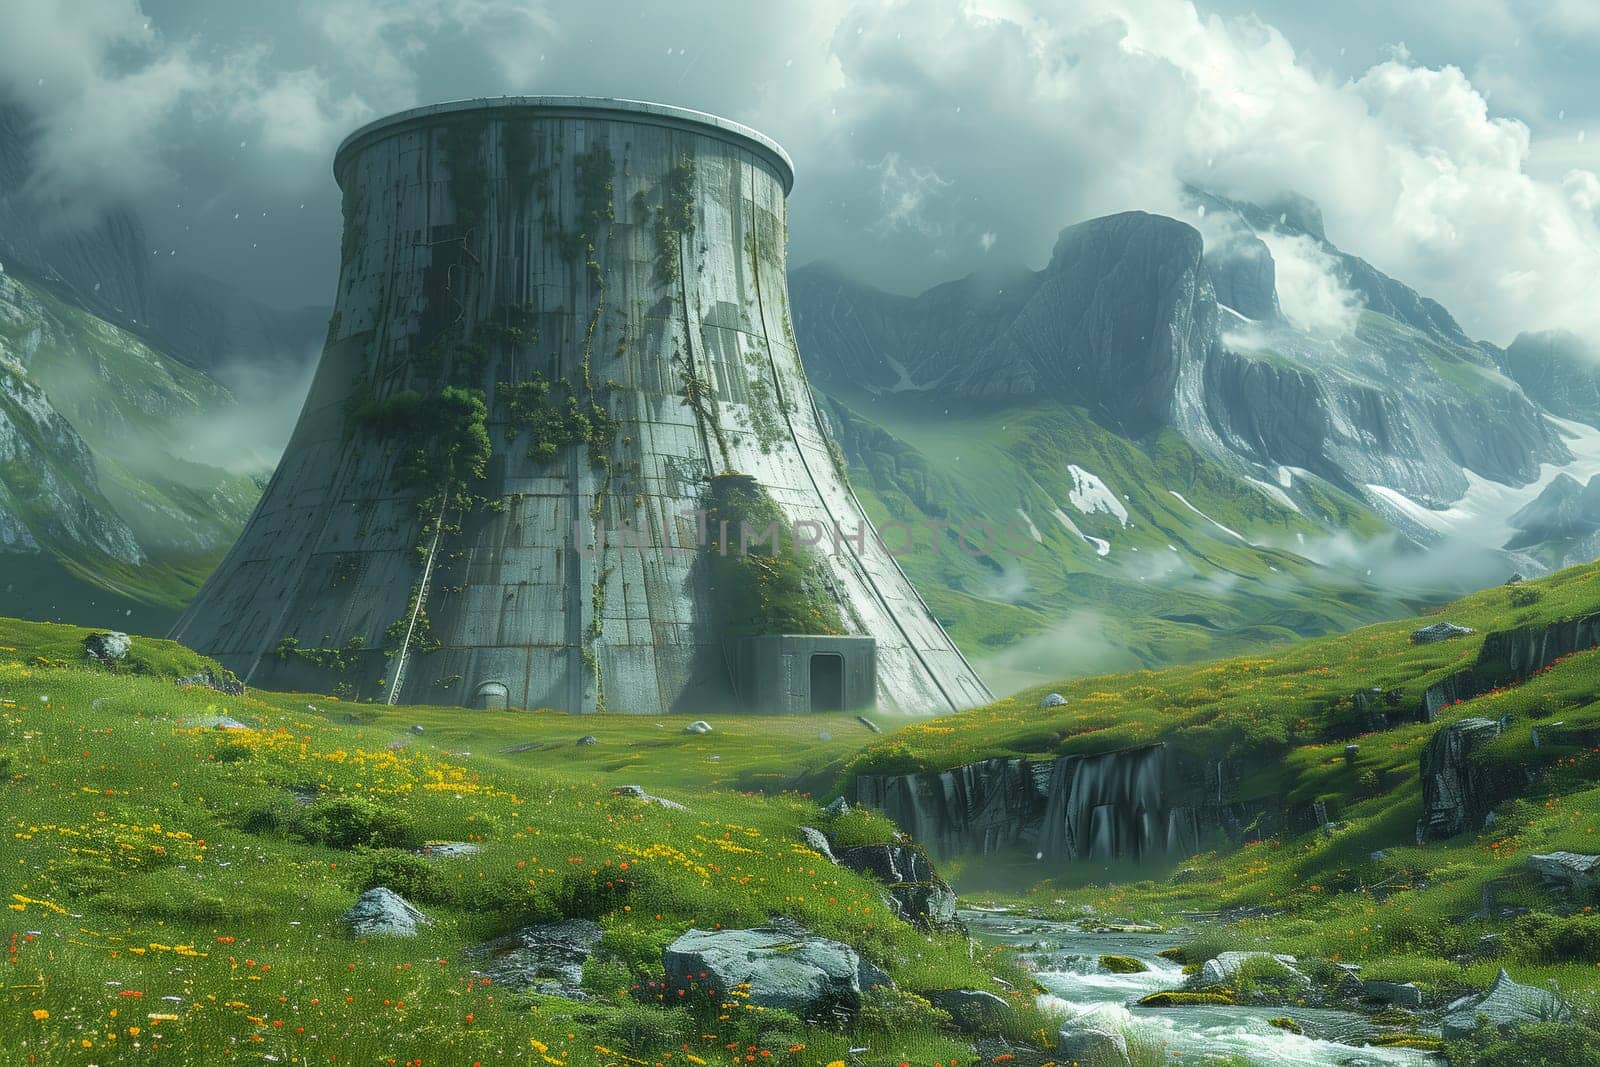 a large cooling tower in the middle of a grassy field with mountains in the background by richwolf